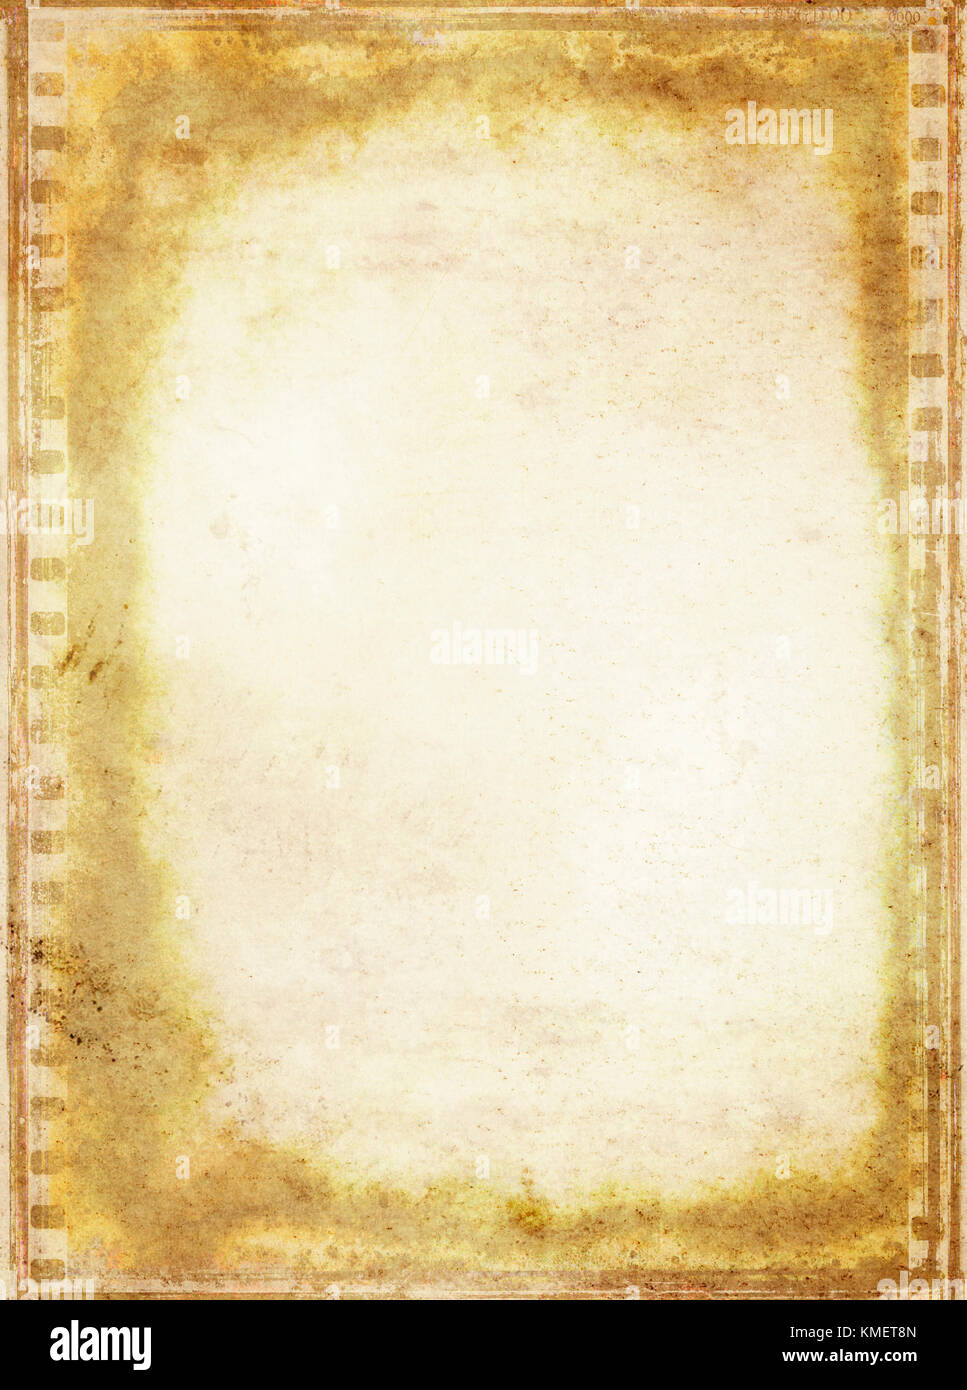 Grunge background with copy space. Old messy paper texture and old film frame. Stock Photo